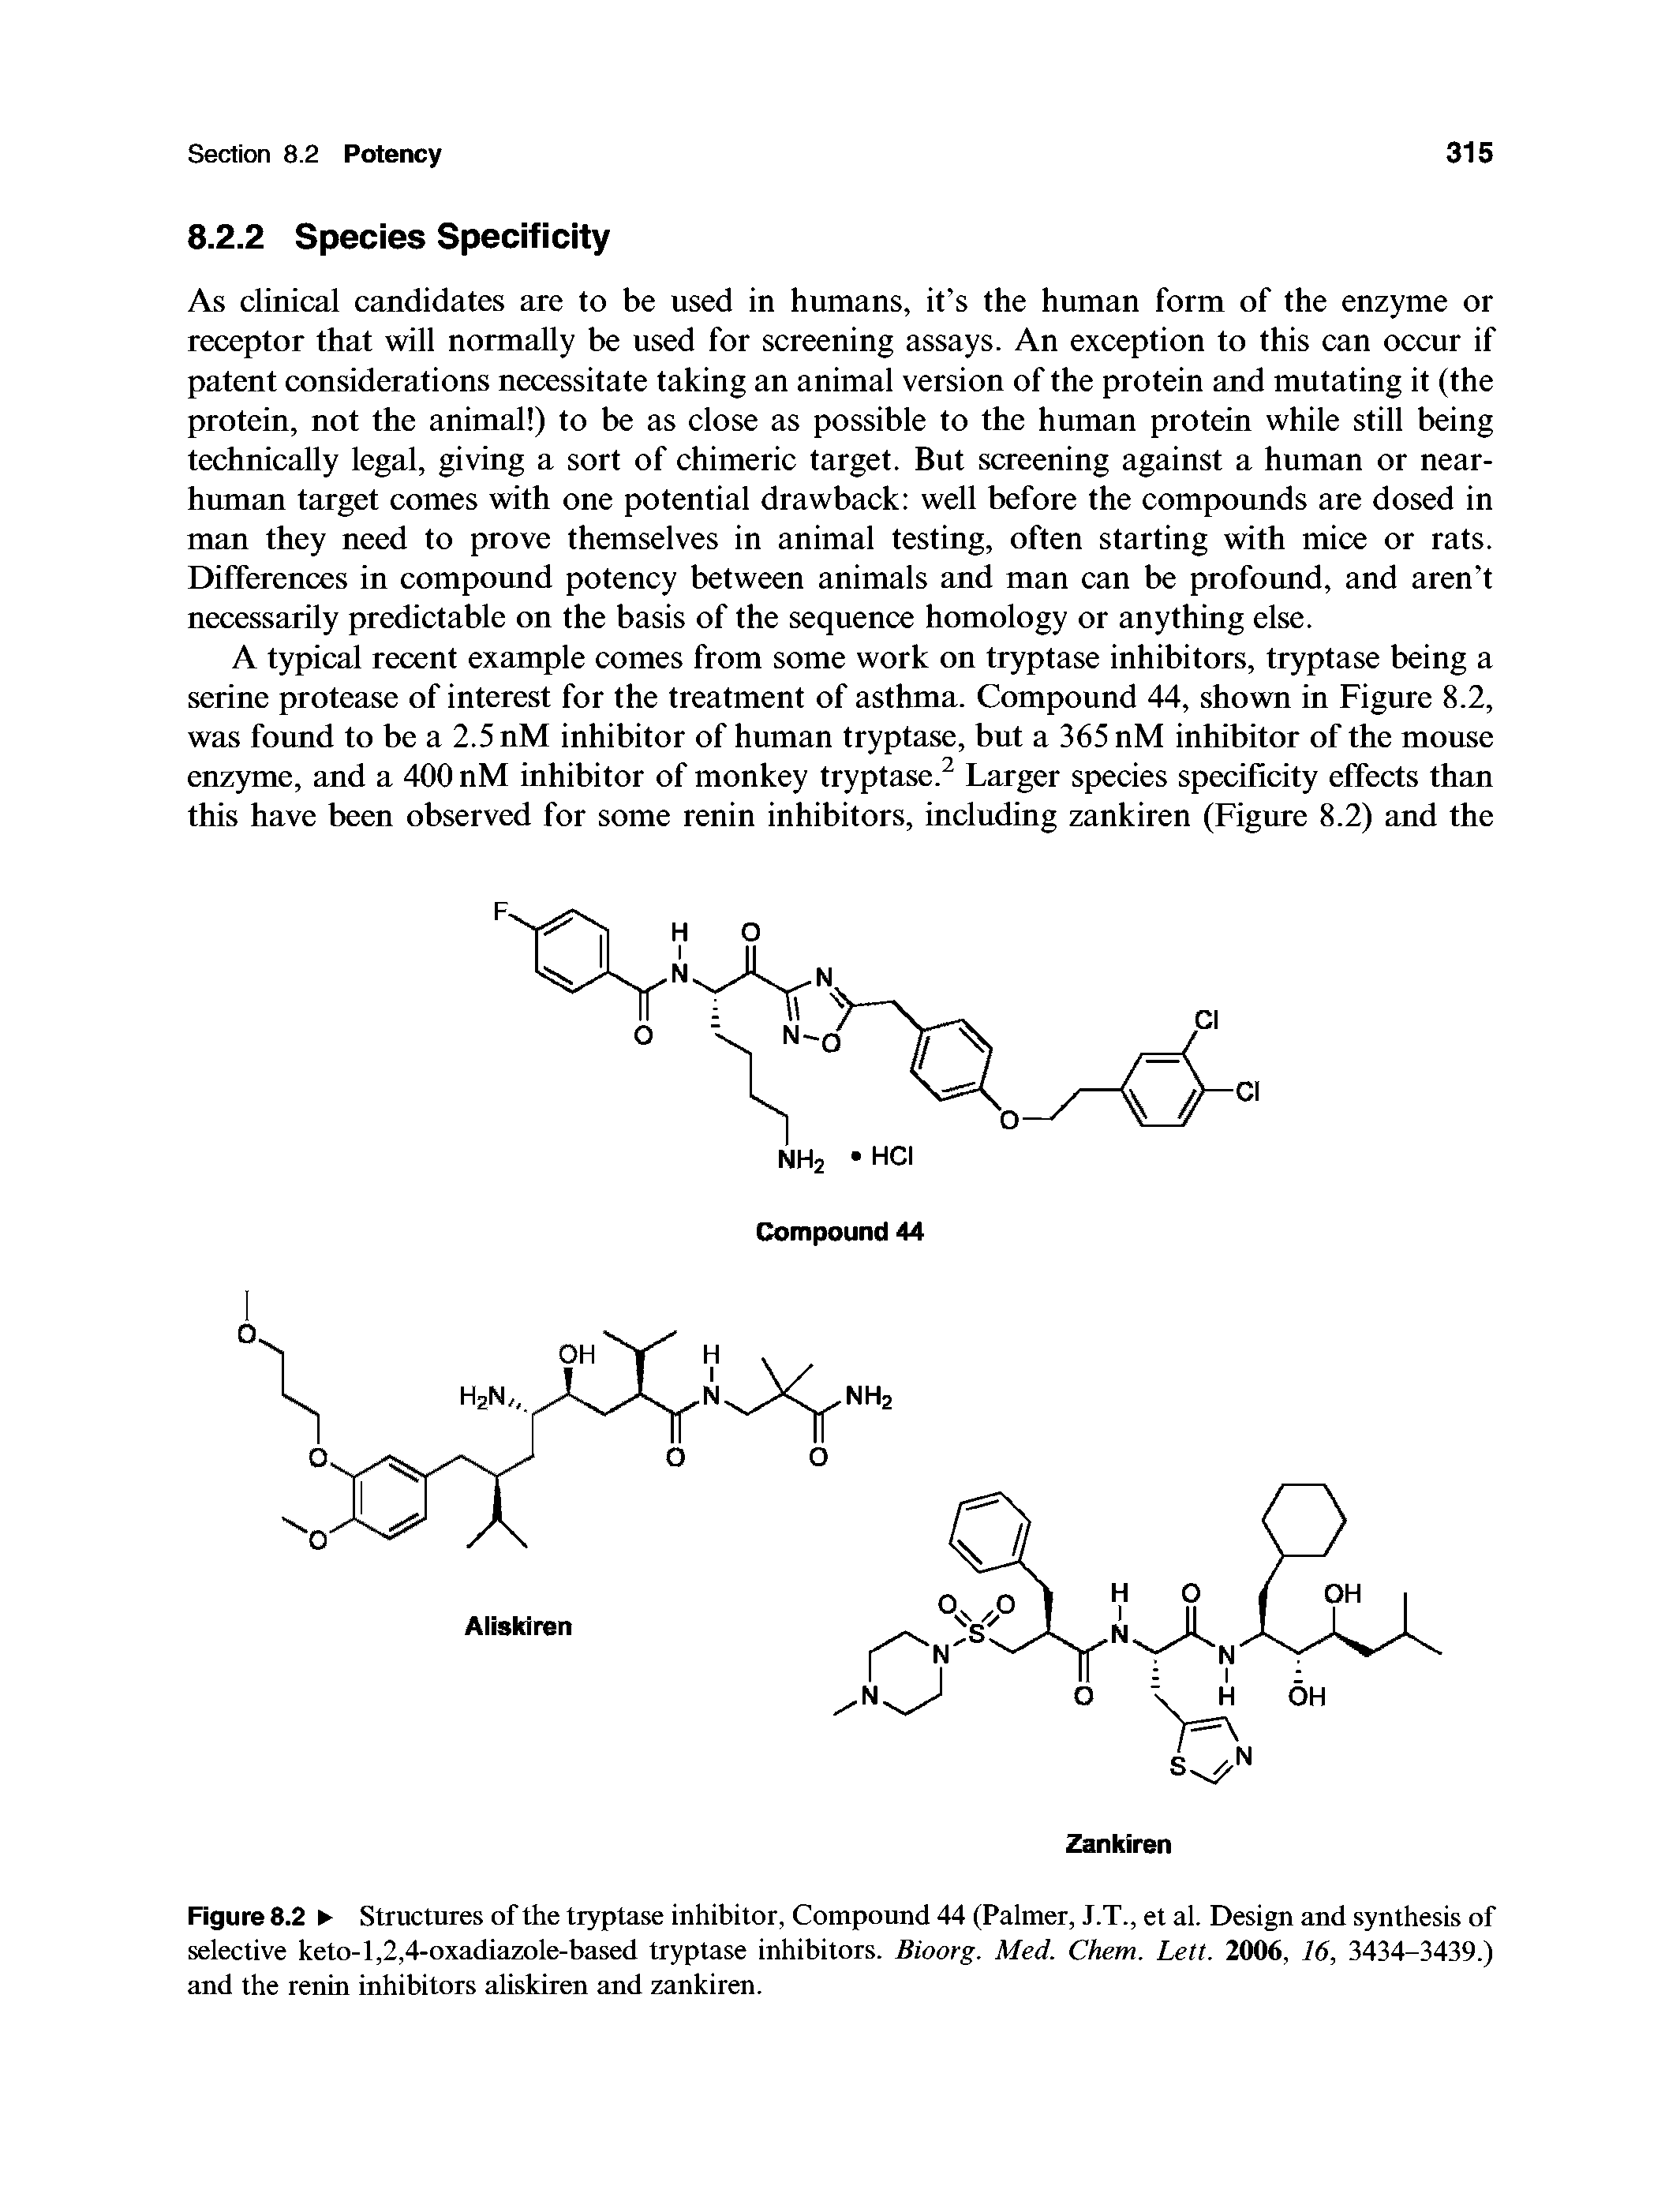 Figure 8.2 Structures of the tryptase inhibitor, Compound 44 (Palmer, J.T., et al. Design and synthesis of selective keto-l,2,4-oxadiazole-based tryptase inhibitors. Bioorg. Med. Chem. Lett. 2006, 16, 3434-3439.) and the renin inhibitors aliskiren and zankiren.